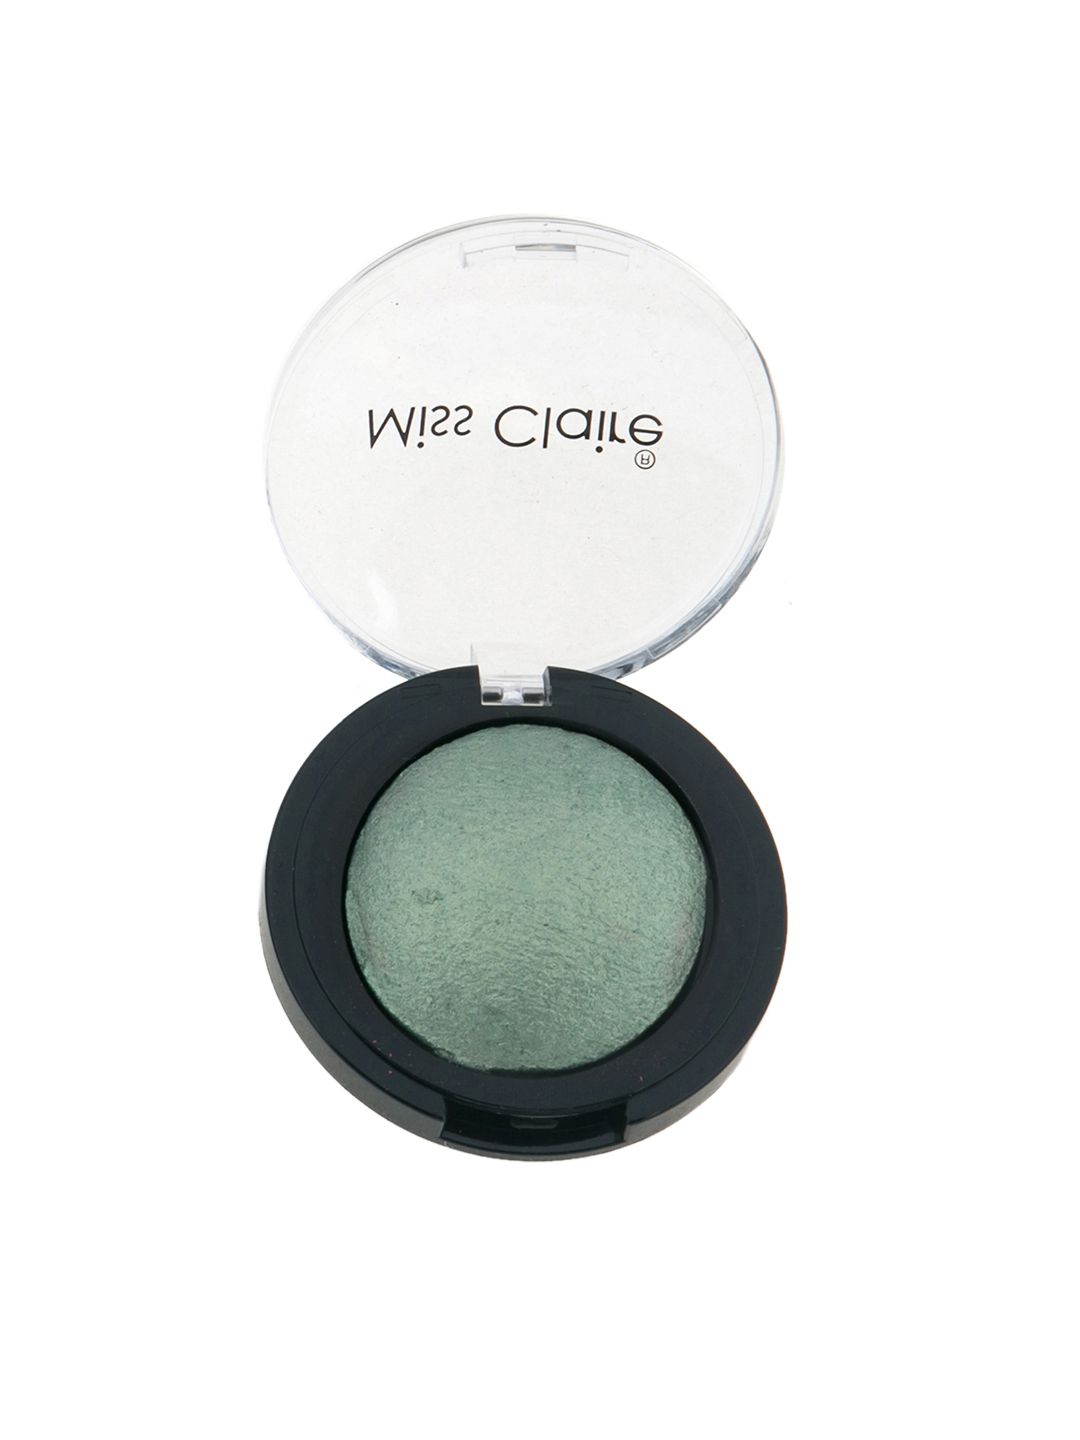 Miss Claire 11 Baked Eyeshadow 3.5g Price in India